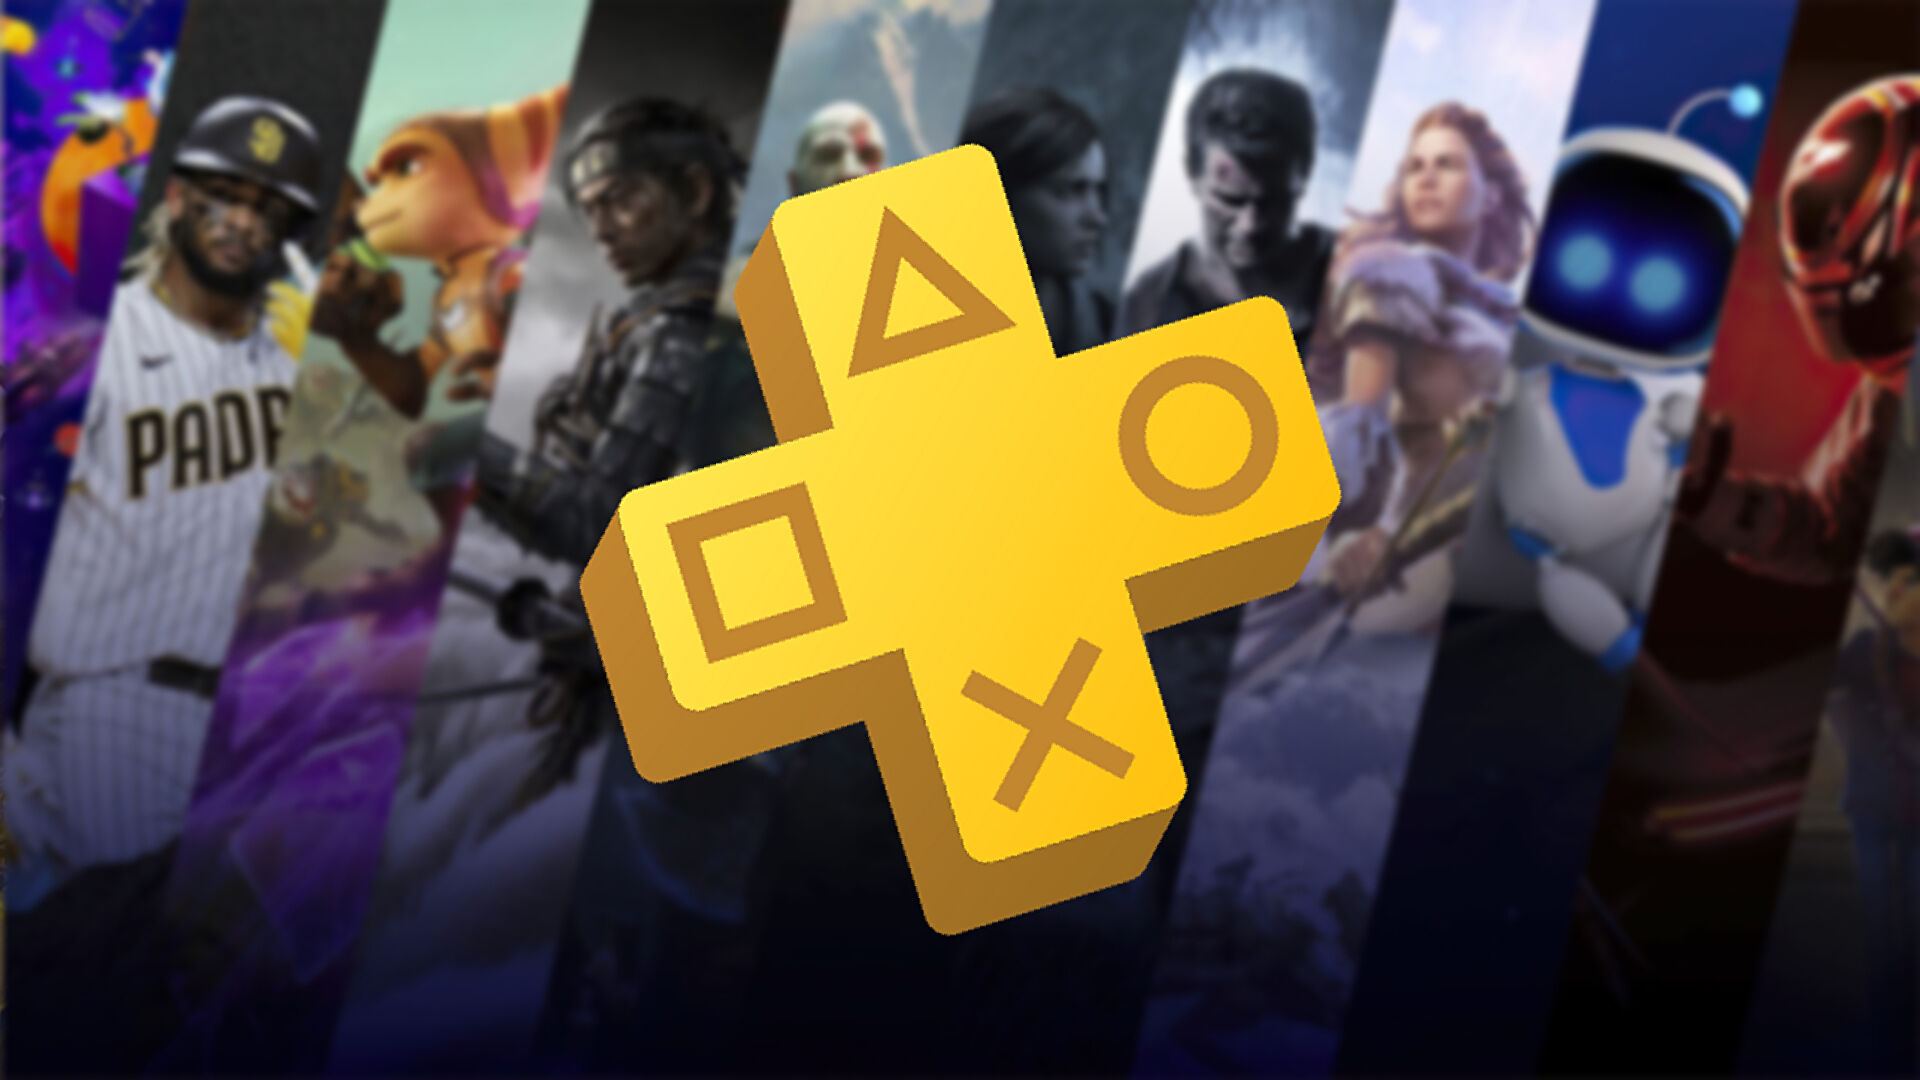 The updated PS Plus subscription will launch in Europe on June 22